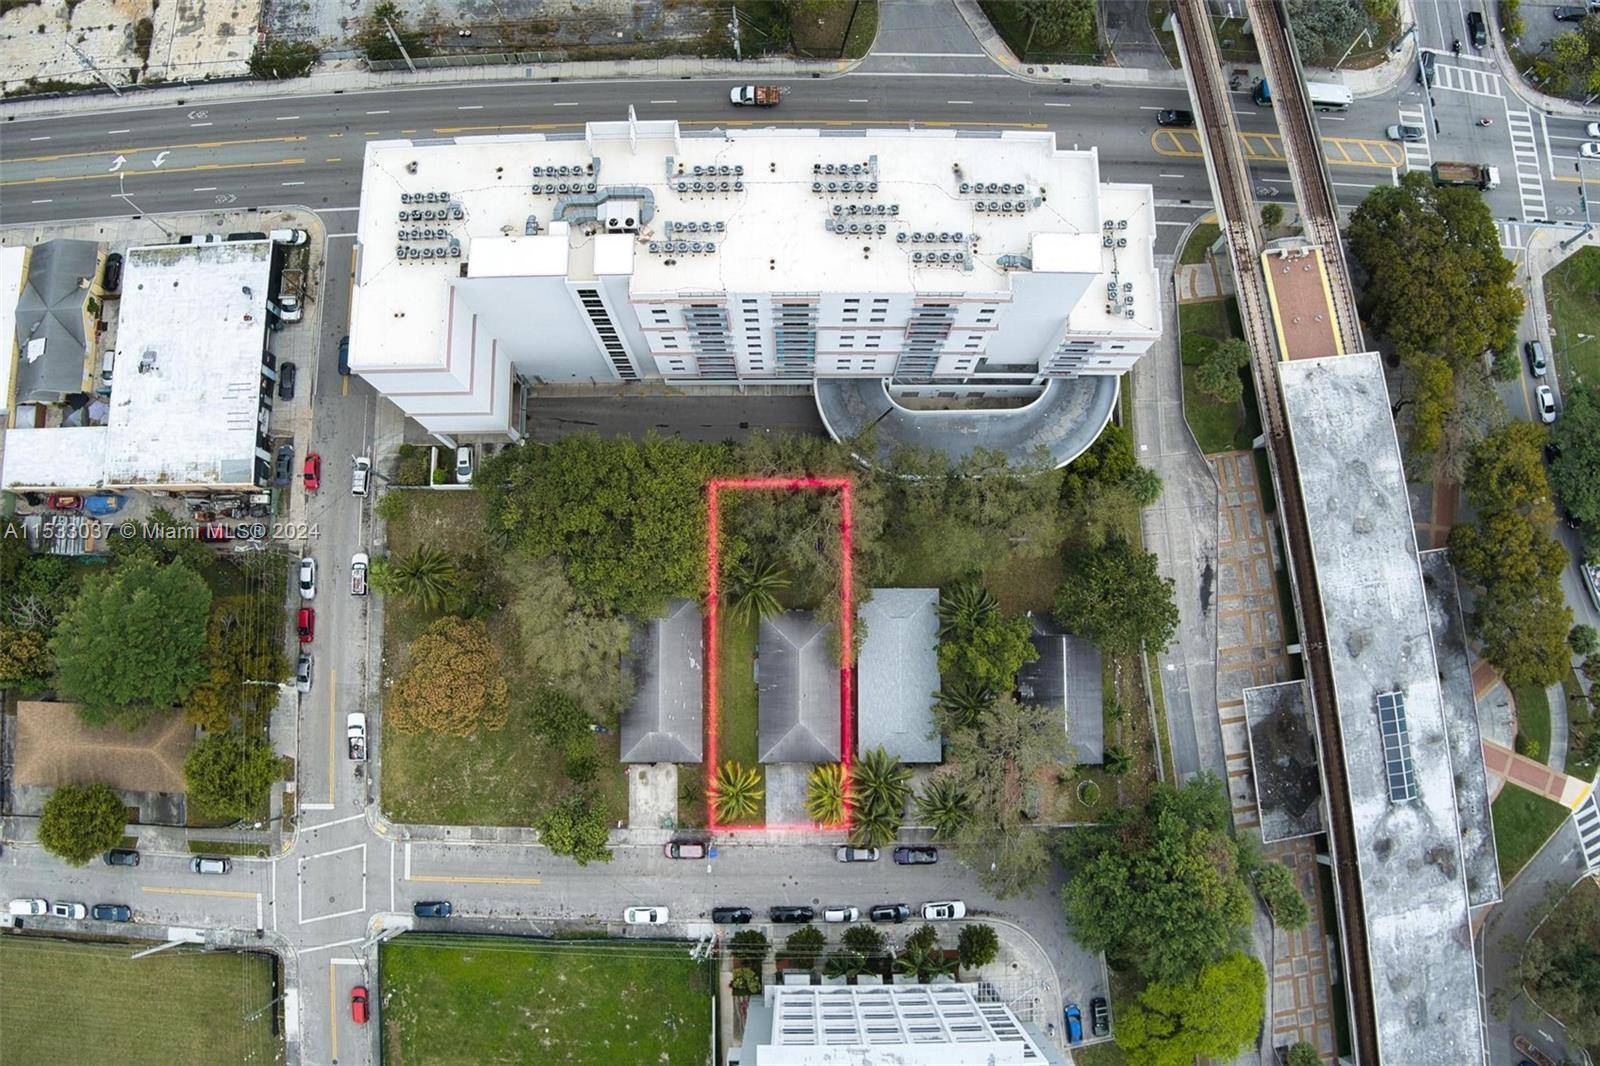 An amazing investment opportunity on this strategically located T6 8 zoned lot near Downtown Miami, the Miami River, Miami s Health District, Loan Depot Park, the Kaseya Center and more ...